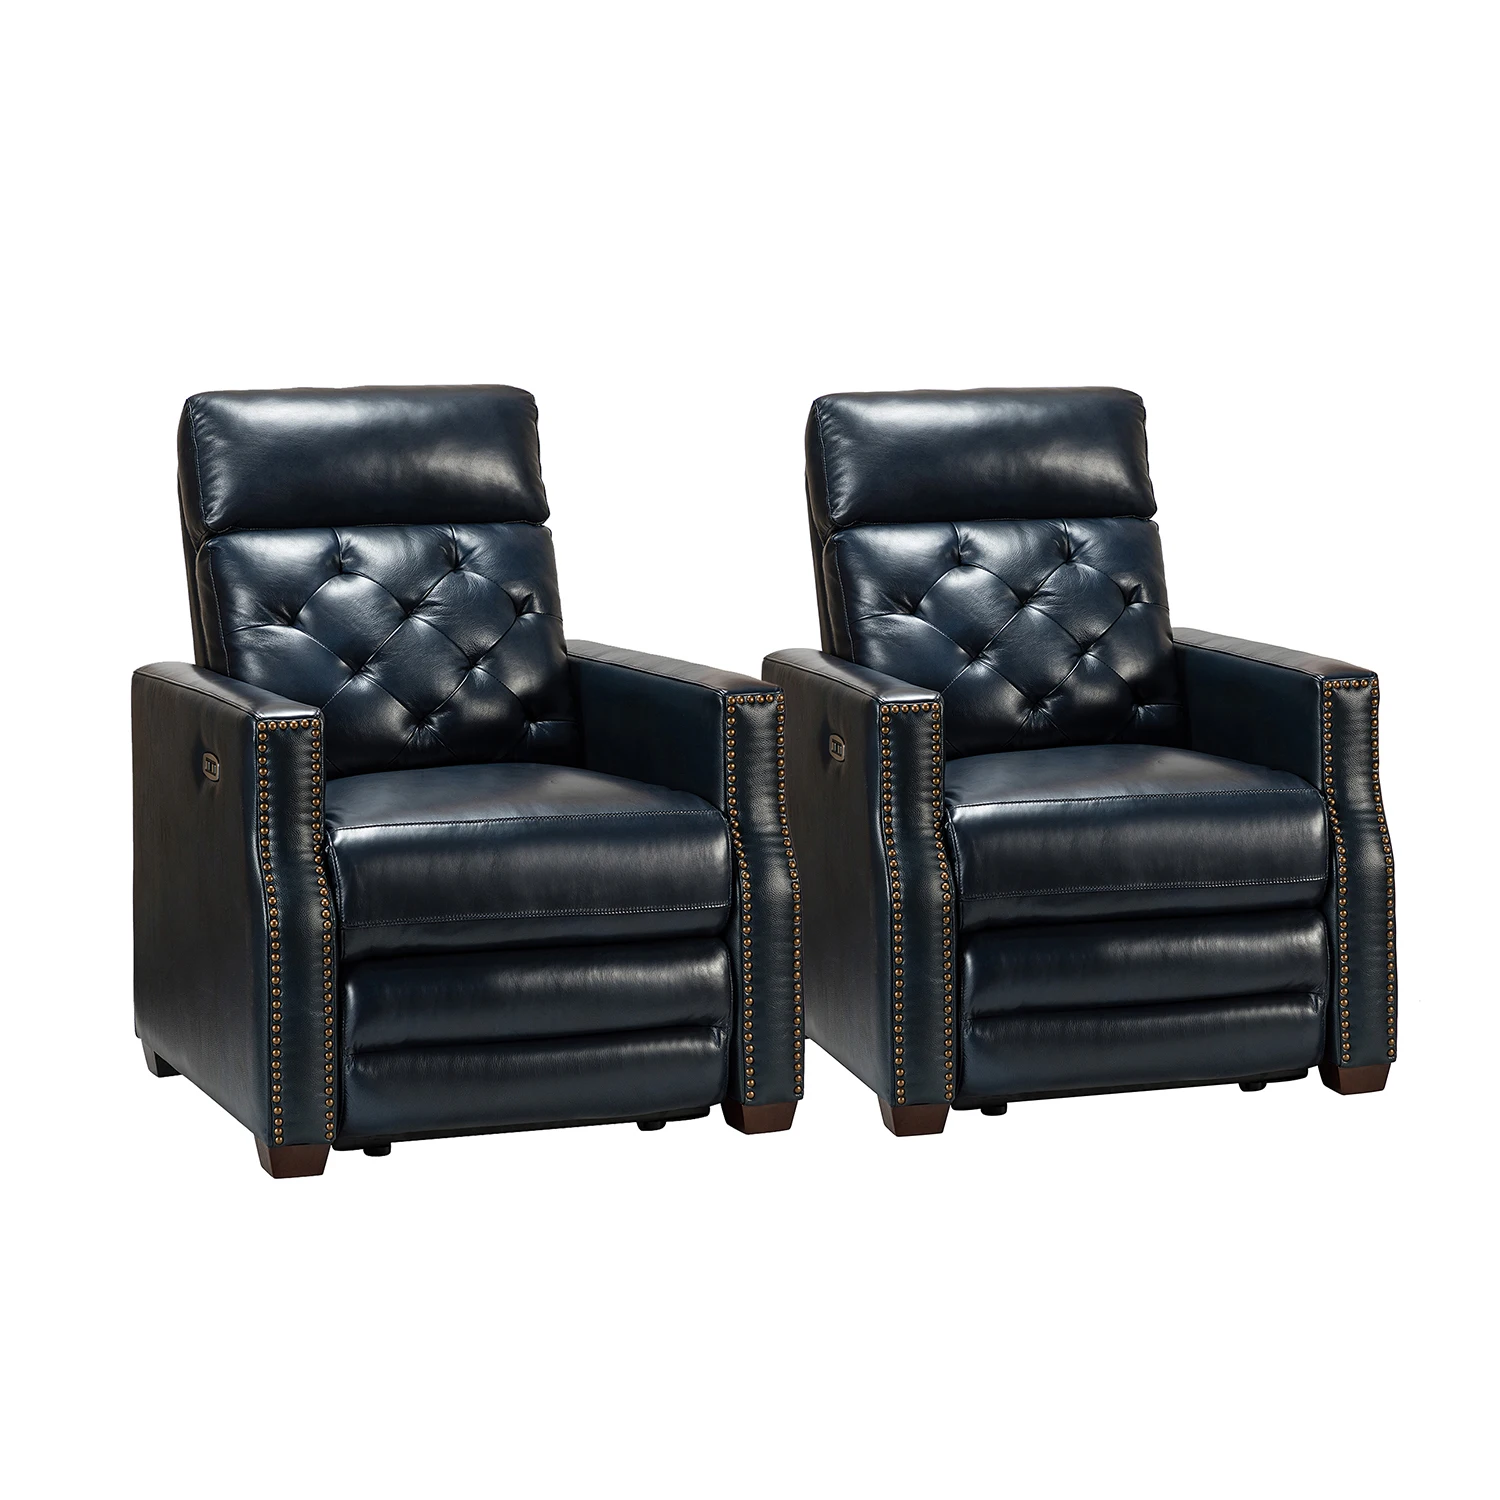 

Home theatre leather recliner sofa reclinable electric massage function living room recliner sofa